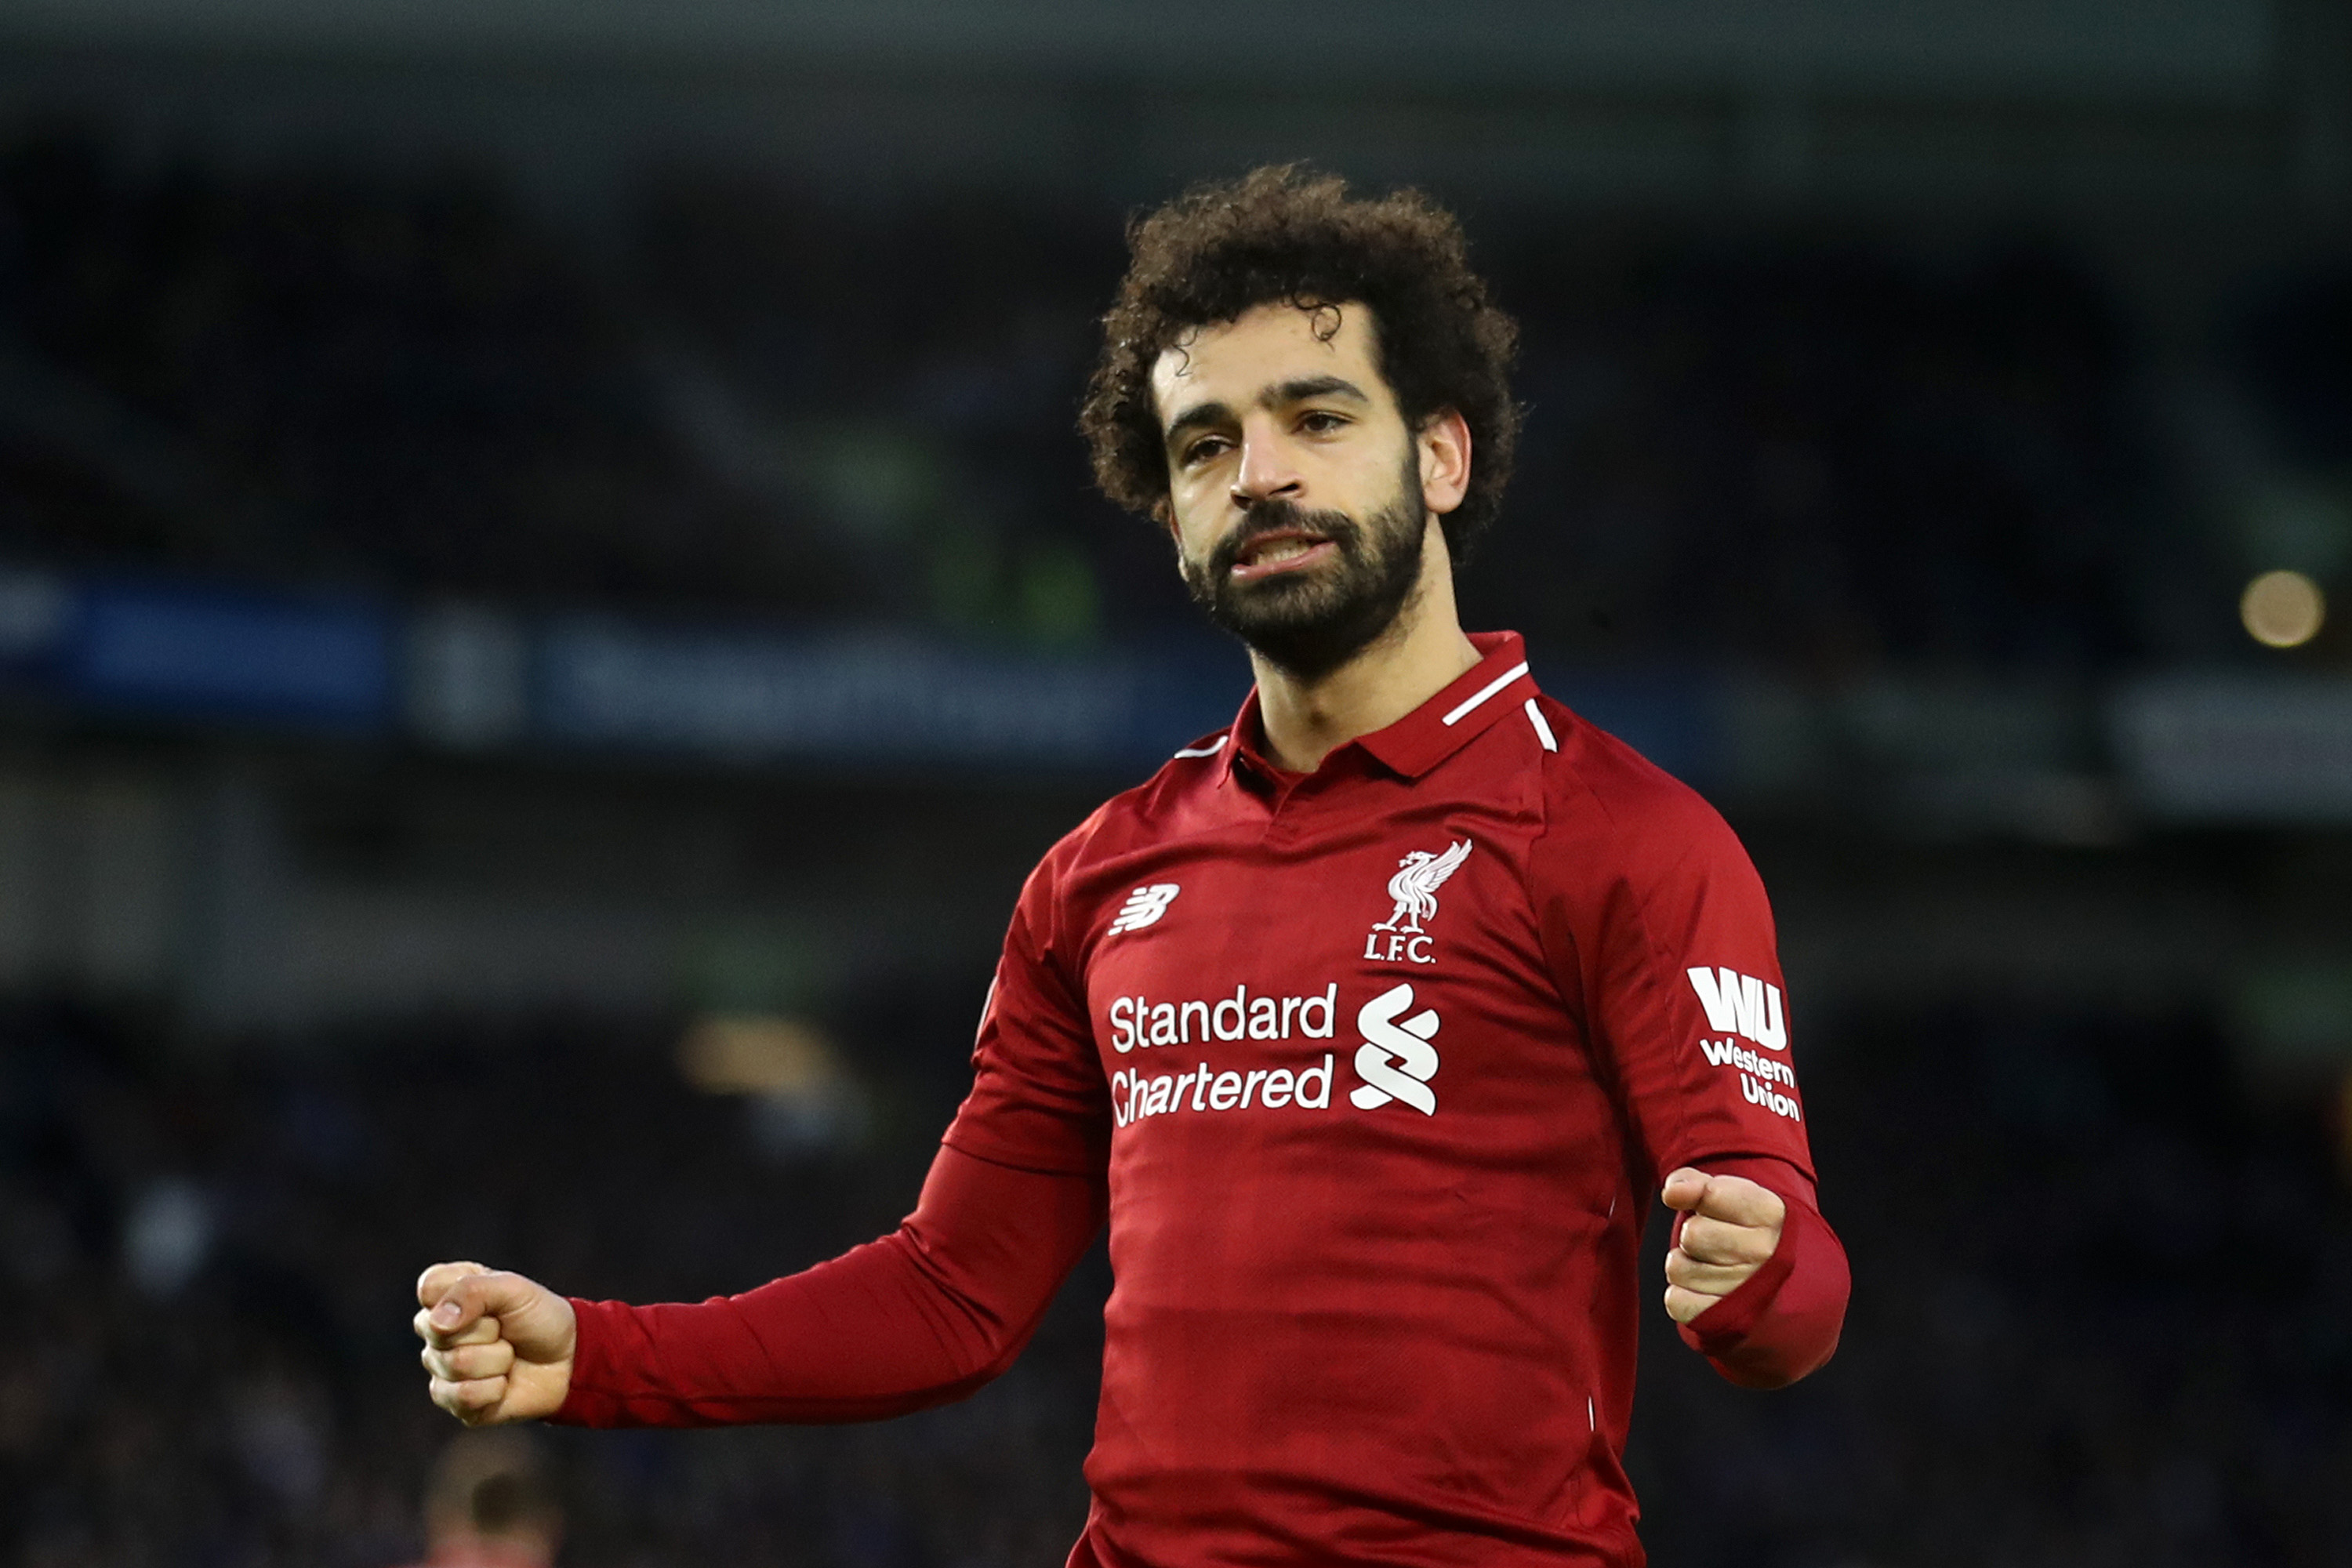 Golden Boot in sight for Salah  (Photo by Bryn Lennon/Getty Images)